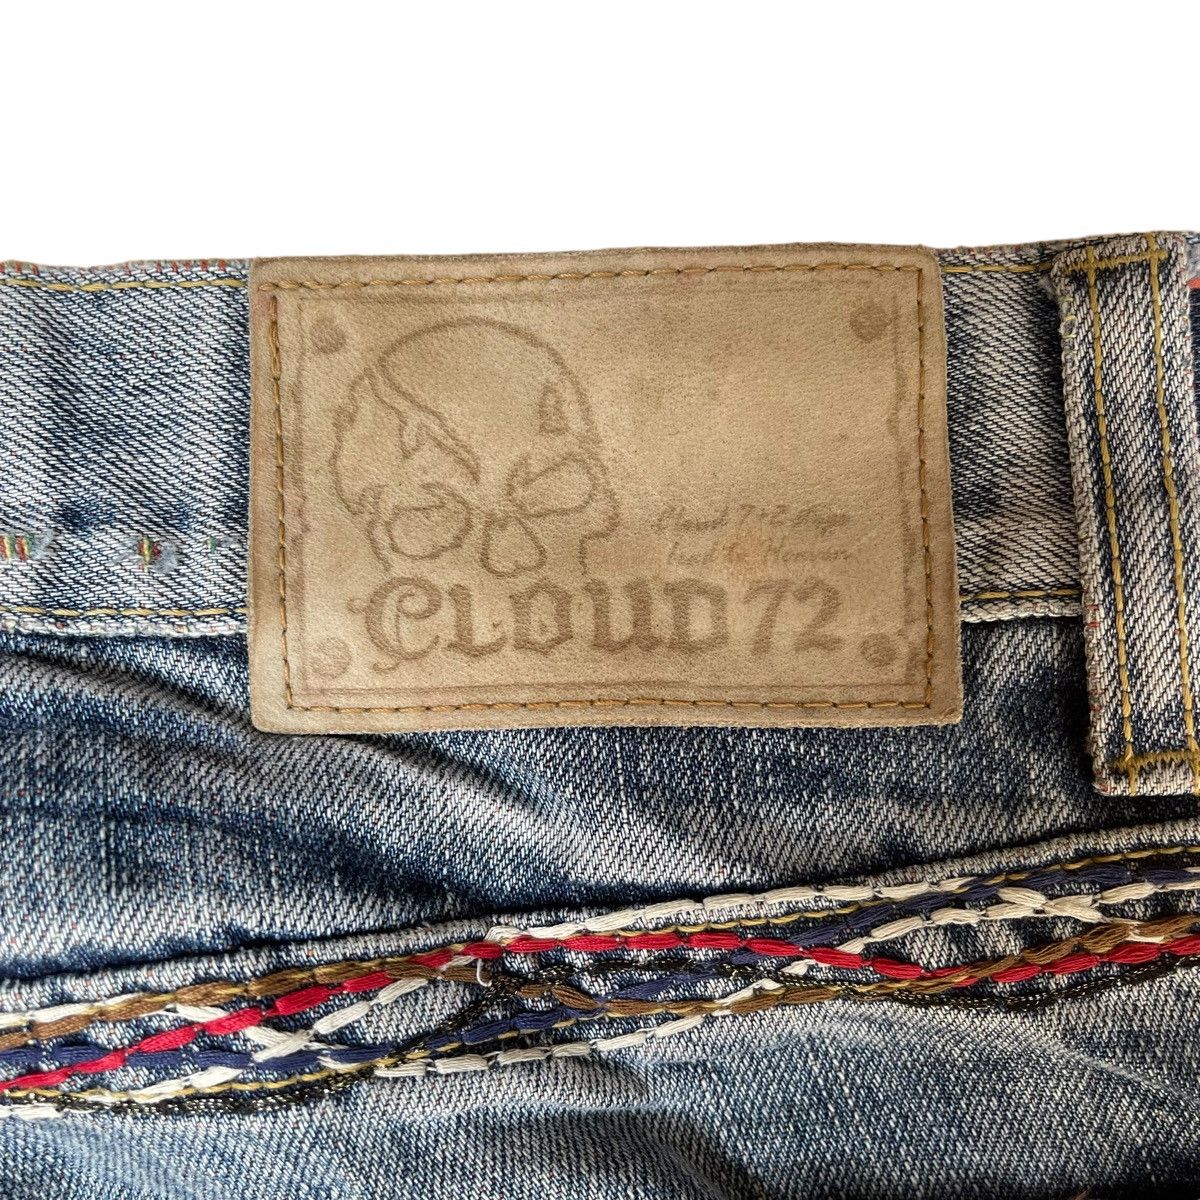 ✅BINDING NOW✅ Japanese Cloud72 Skull Jeans Disteressed Rare - 12